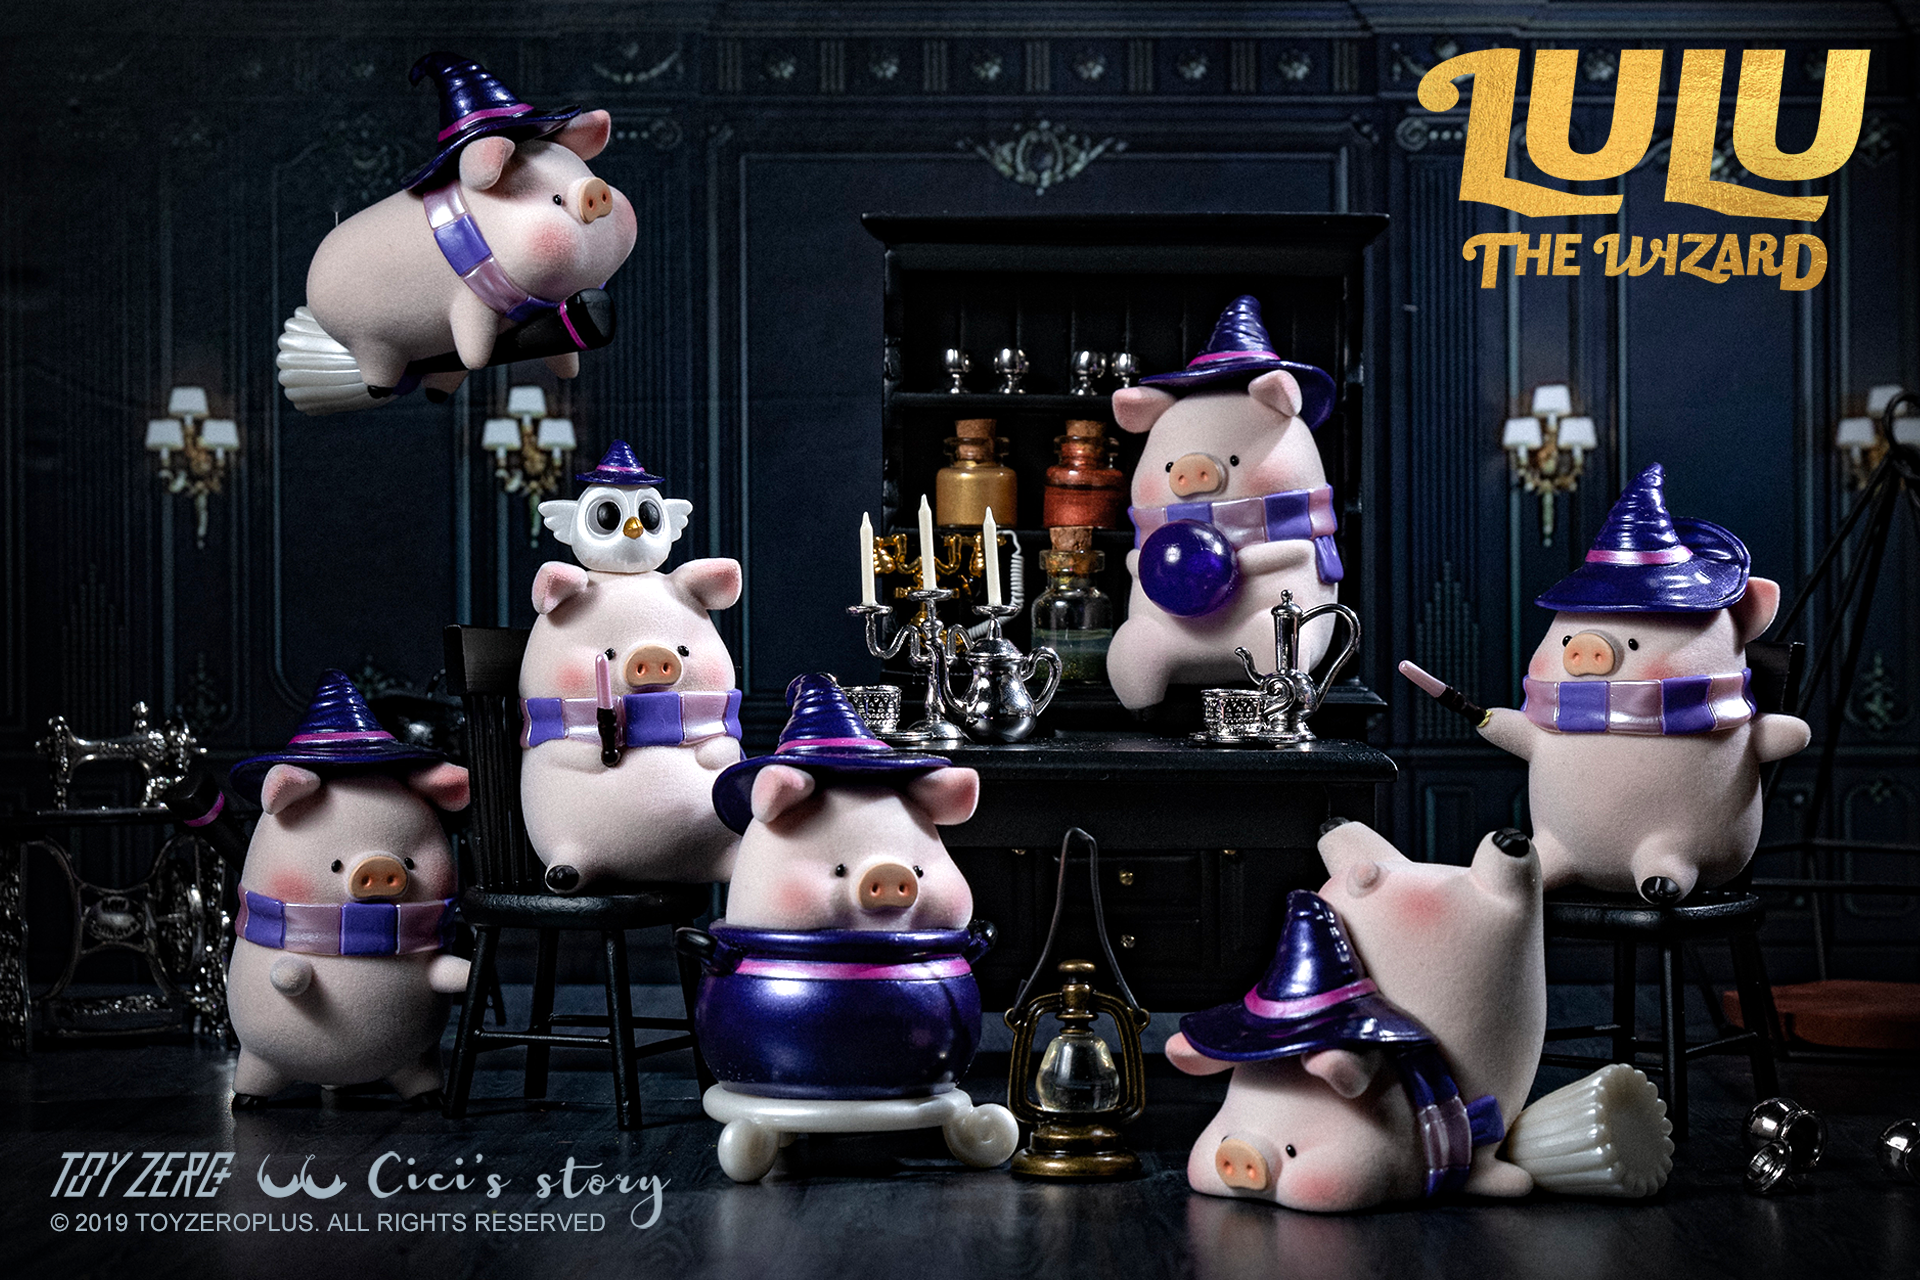 Lulu The Piggy Can - The Wizard Series by Cici’s Story: A group of pigs in various hats and costumes, embodying magical characters and adventures.